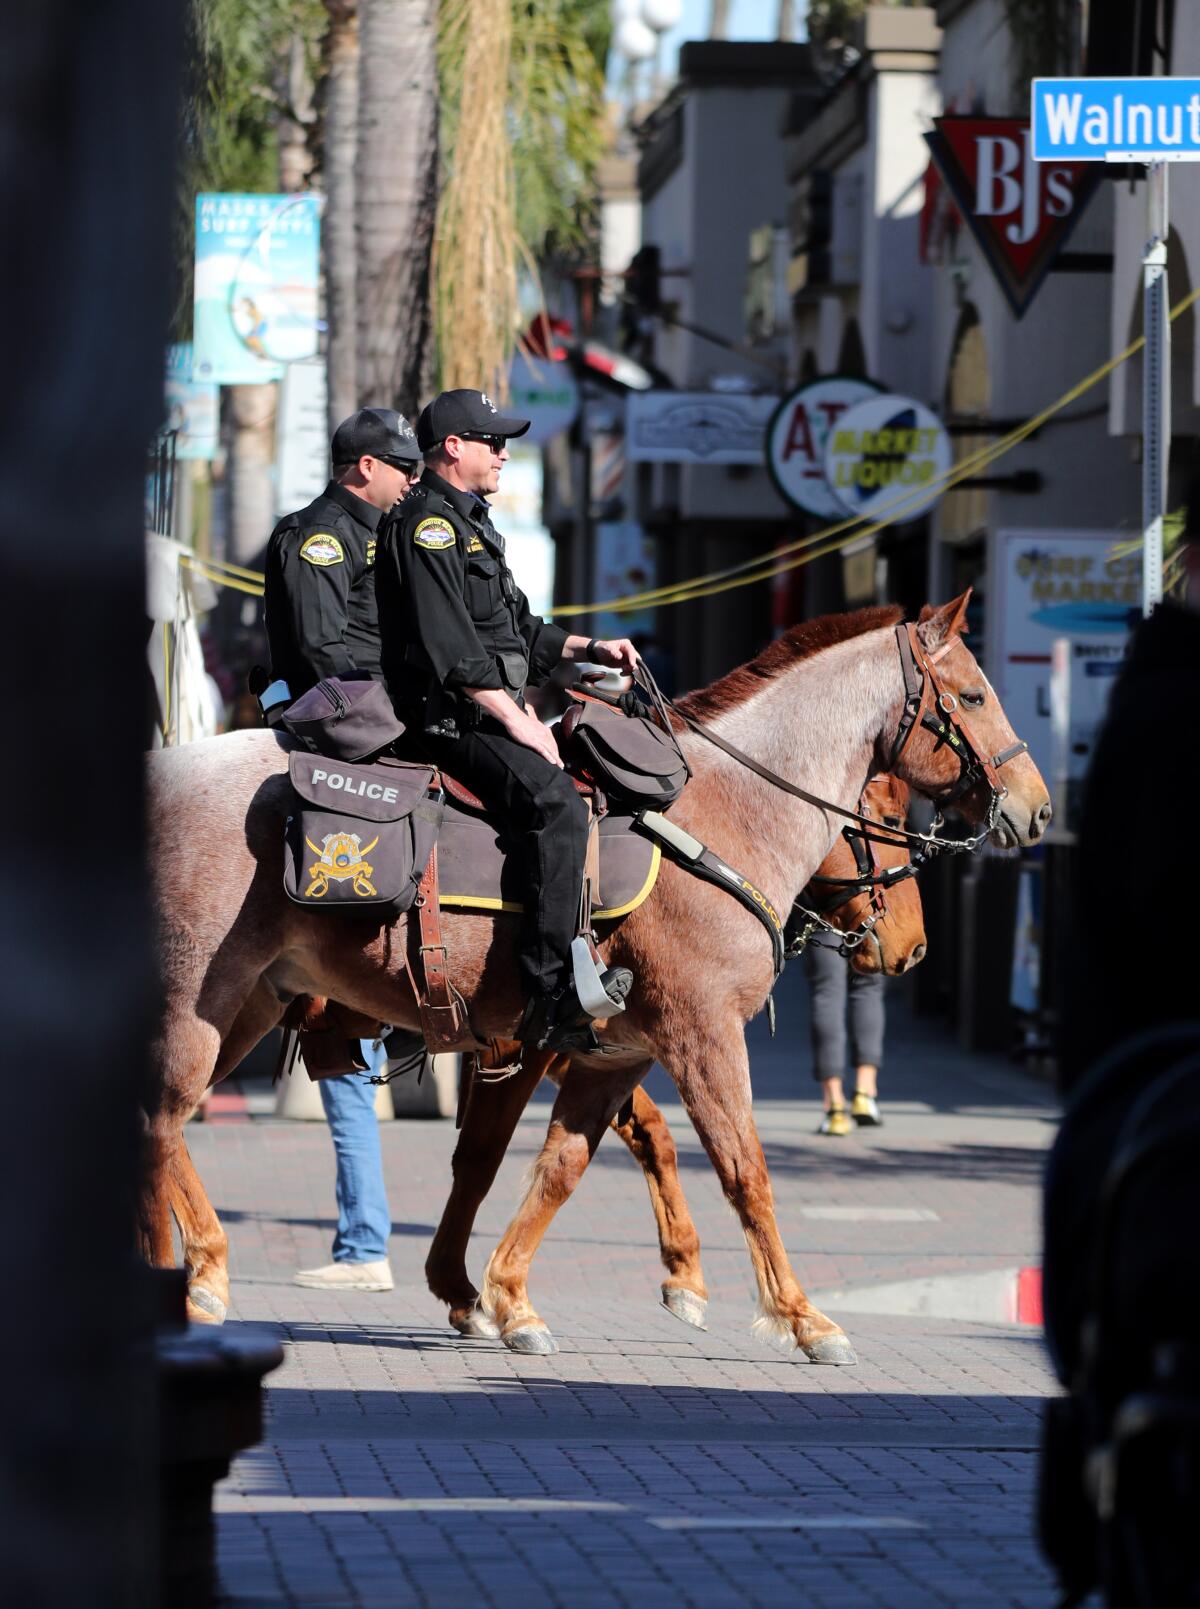 Two mounted police officers carry out a training exercise on Main Street in Huntington Beach on Wednesday.